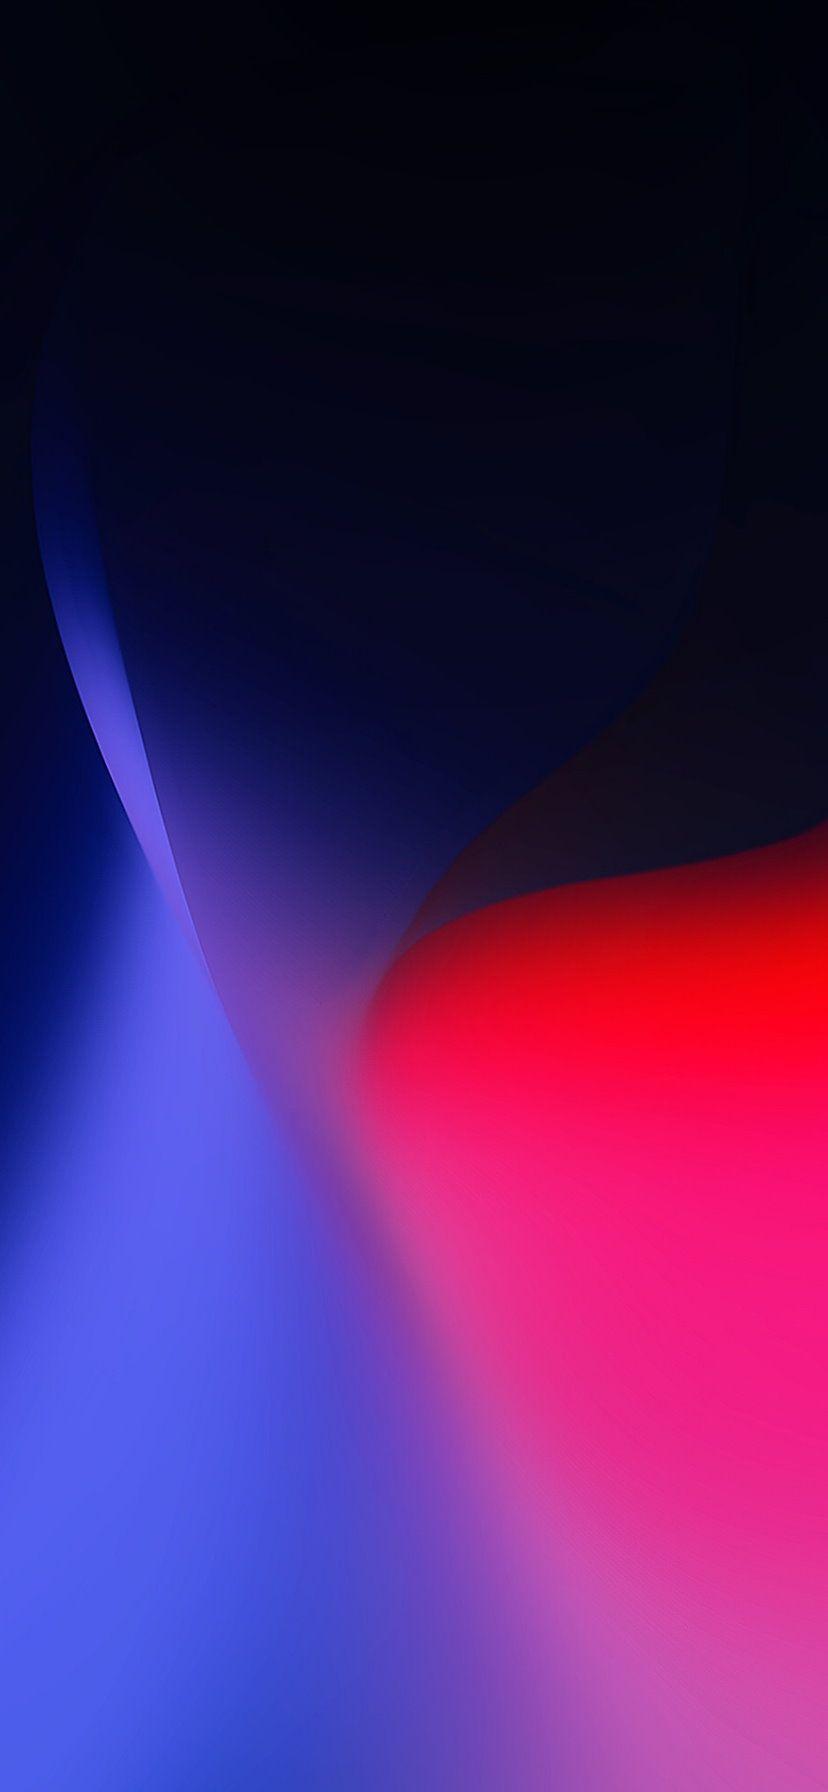 Free download Wallpaper iPhone XR Pack 1 Arts in 2019 iPhone